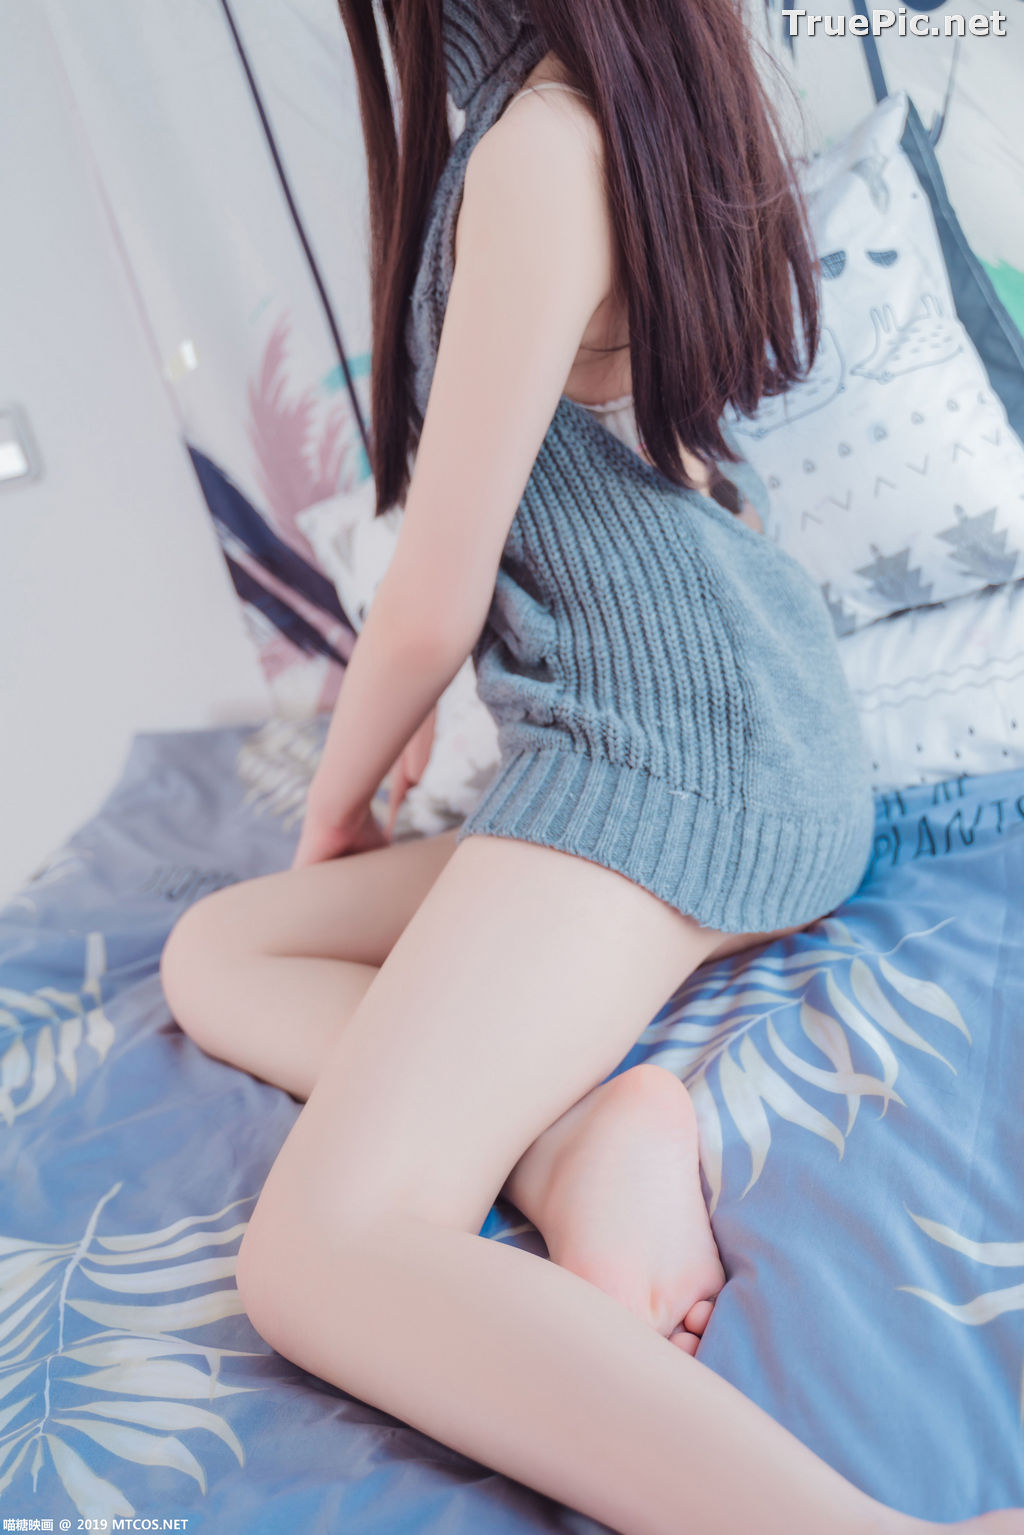 Image [MTCos] 喵糖映画 Vol.030 – Chinese Cute Model – Open Back Sweater - TruePic.net - Picture-30